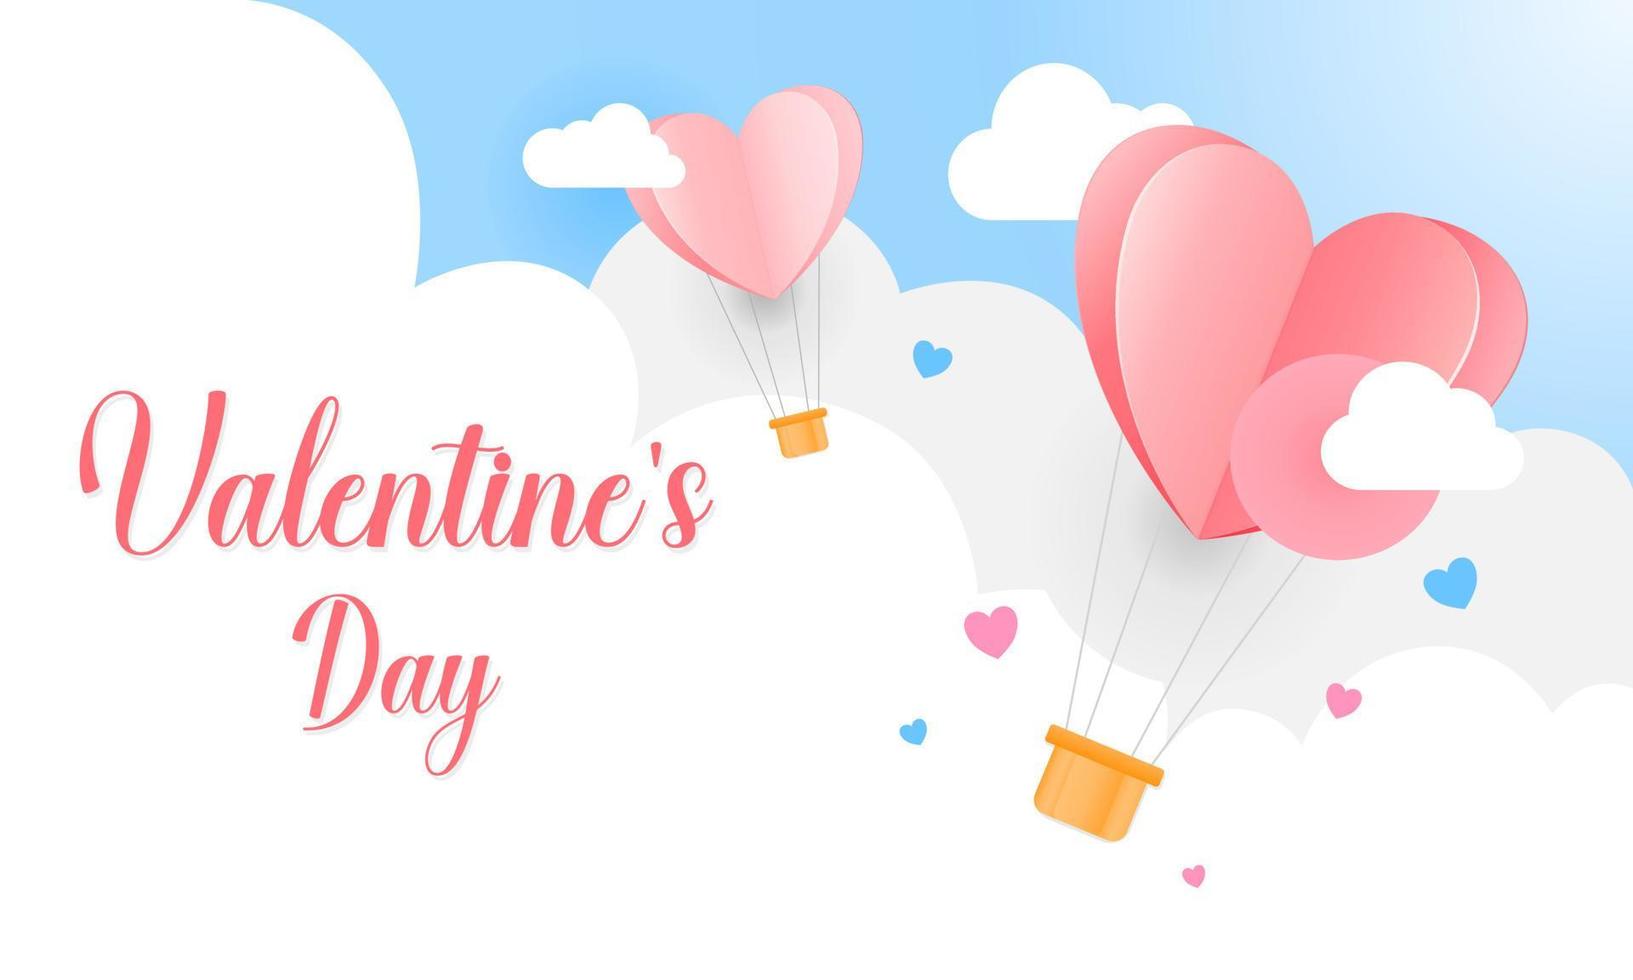 Valentine's day balloon heart with the cloud on the sky vector